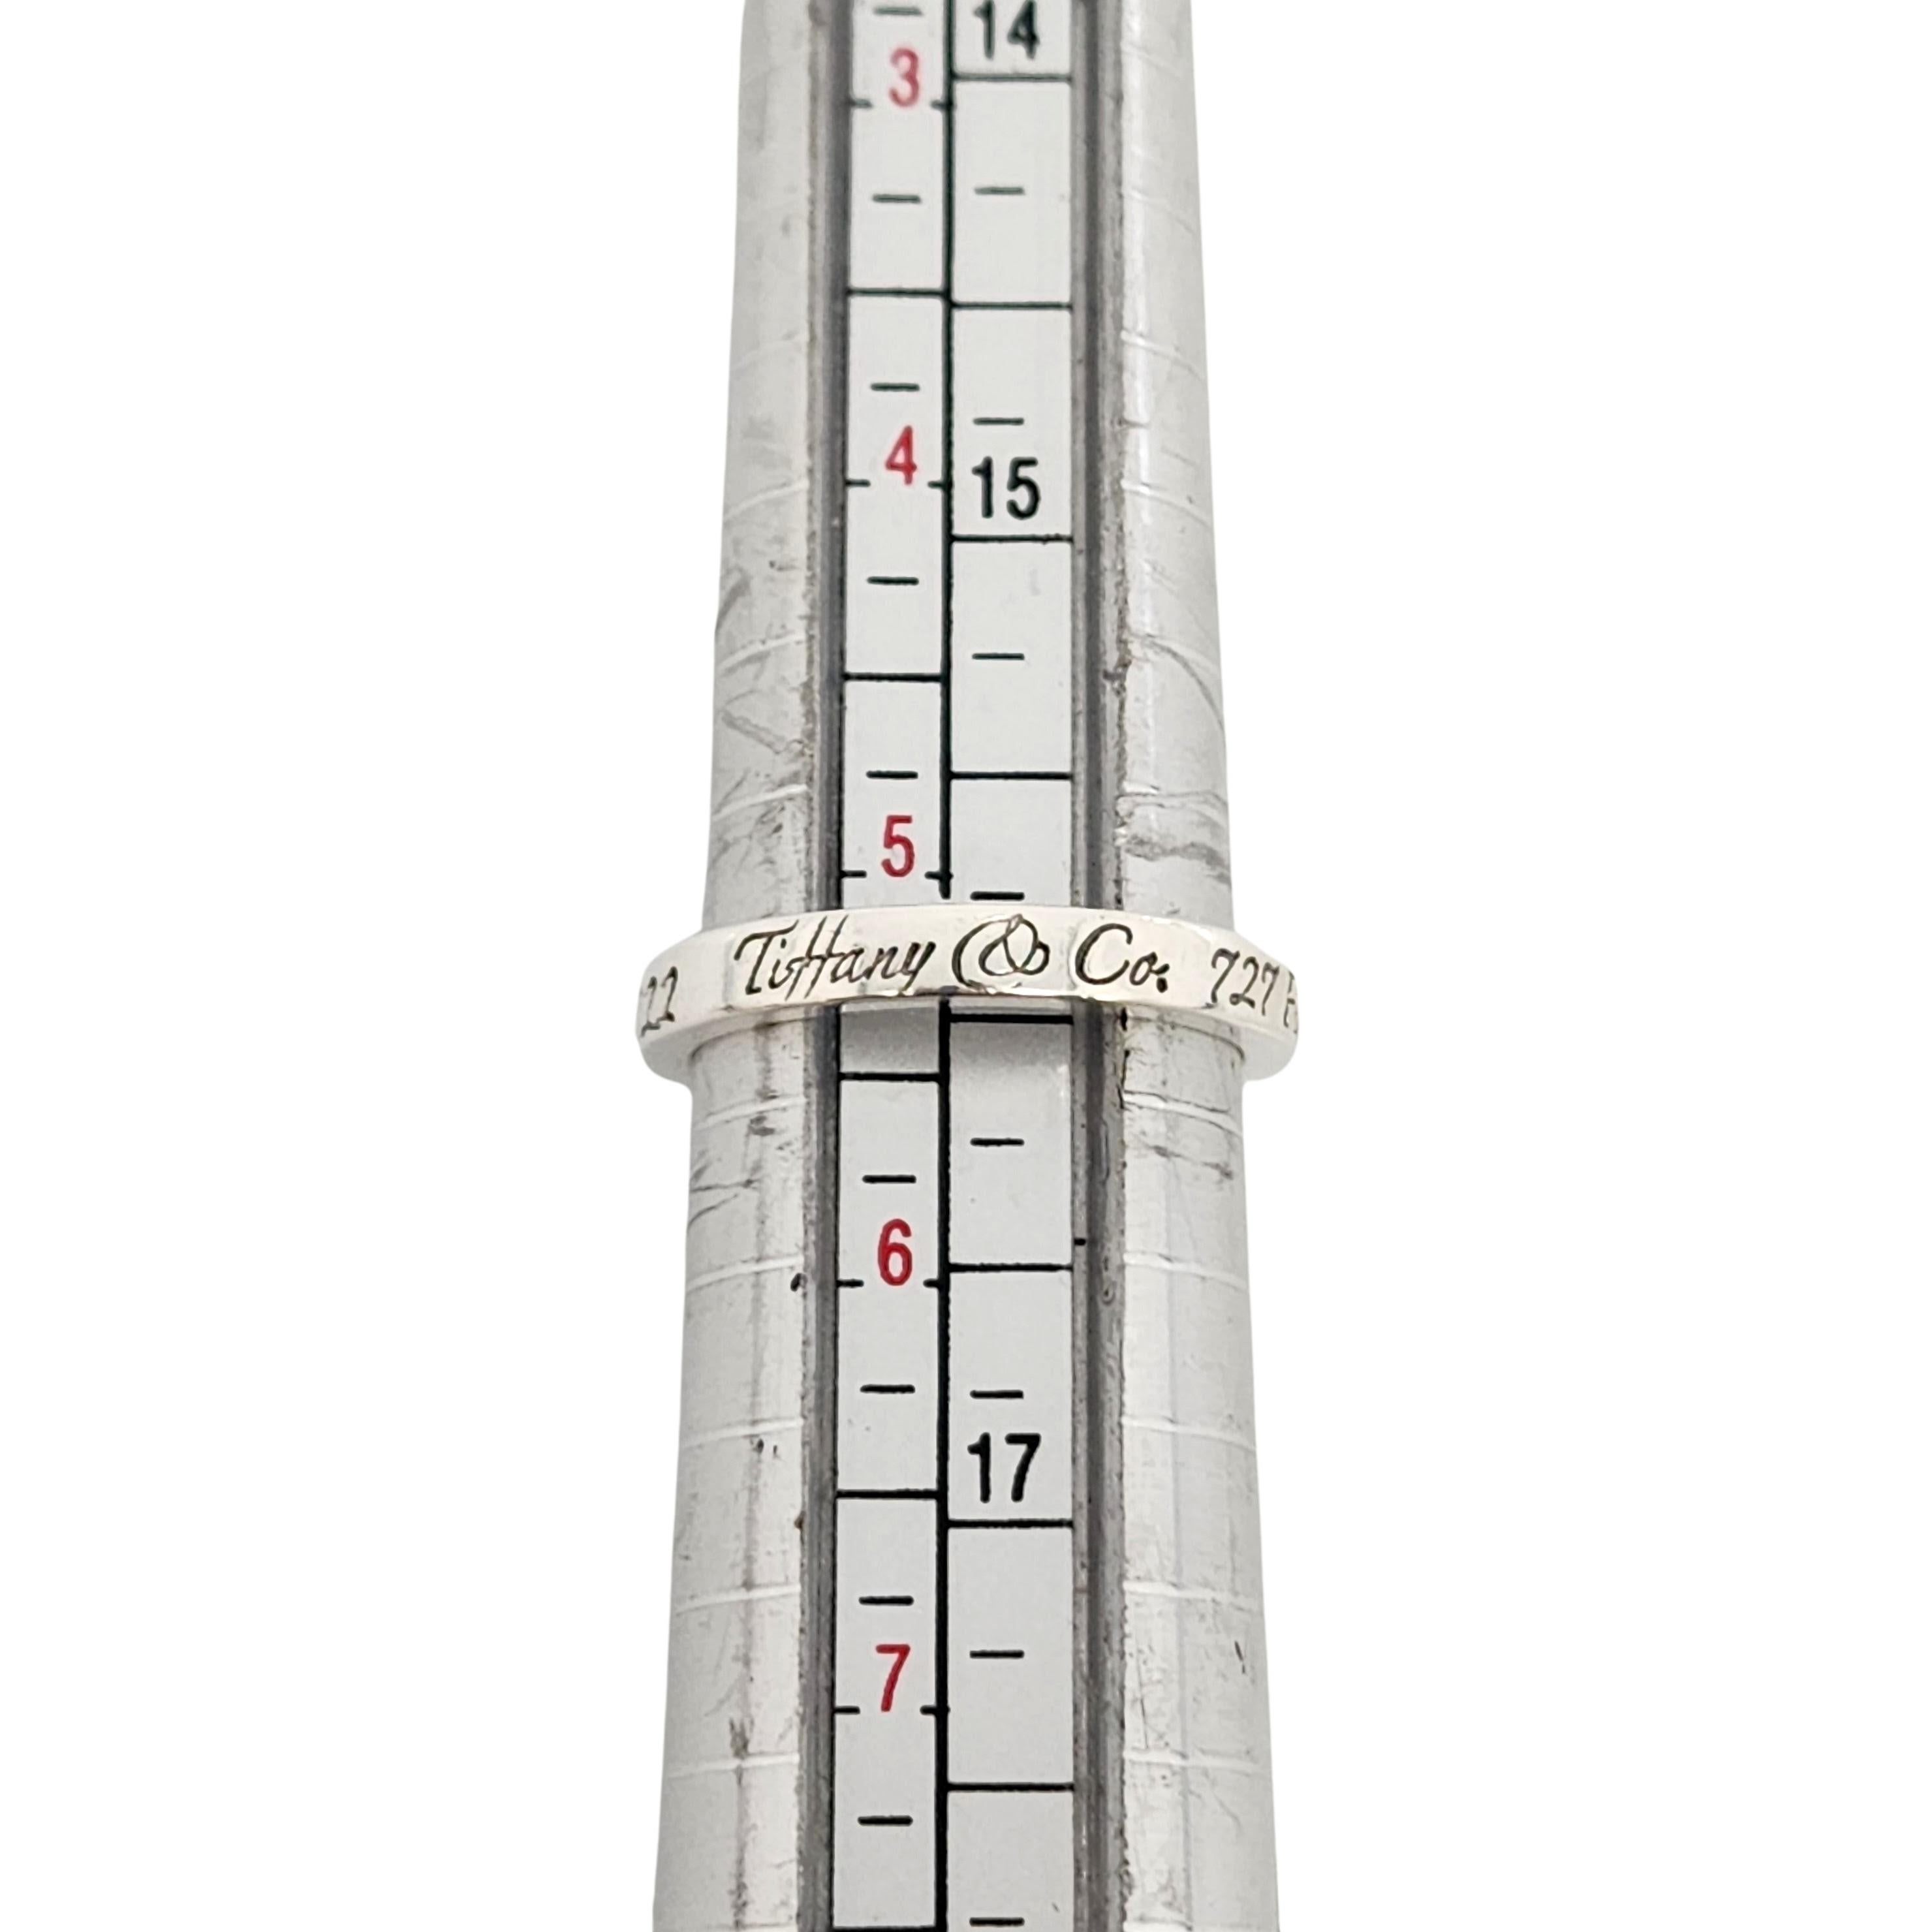 Tiffany & Co New York Address Notes Narrow Band Ring Taille 5,25 n°13007 en vente 2